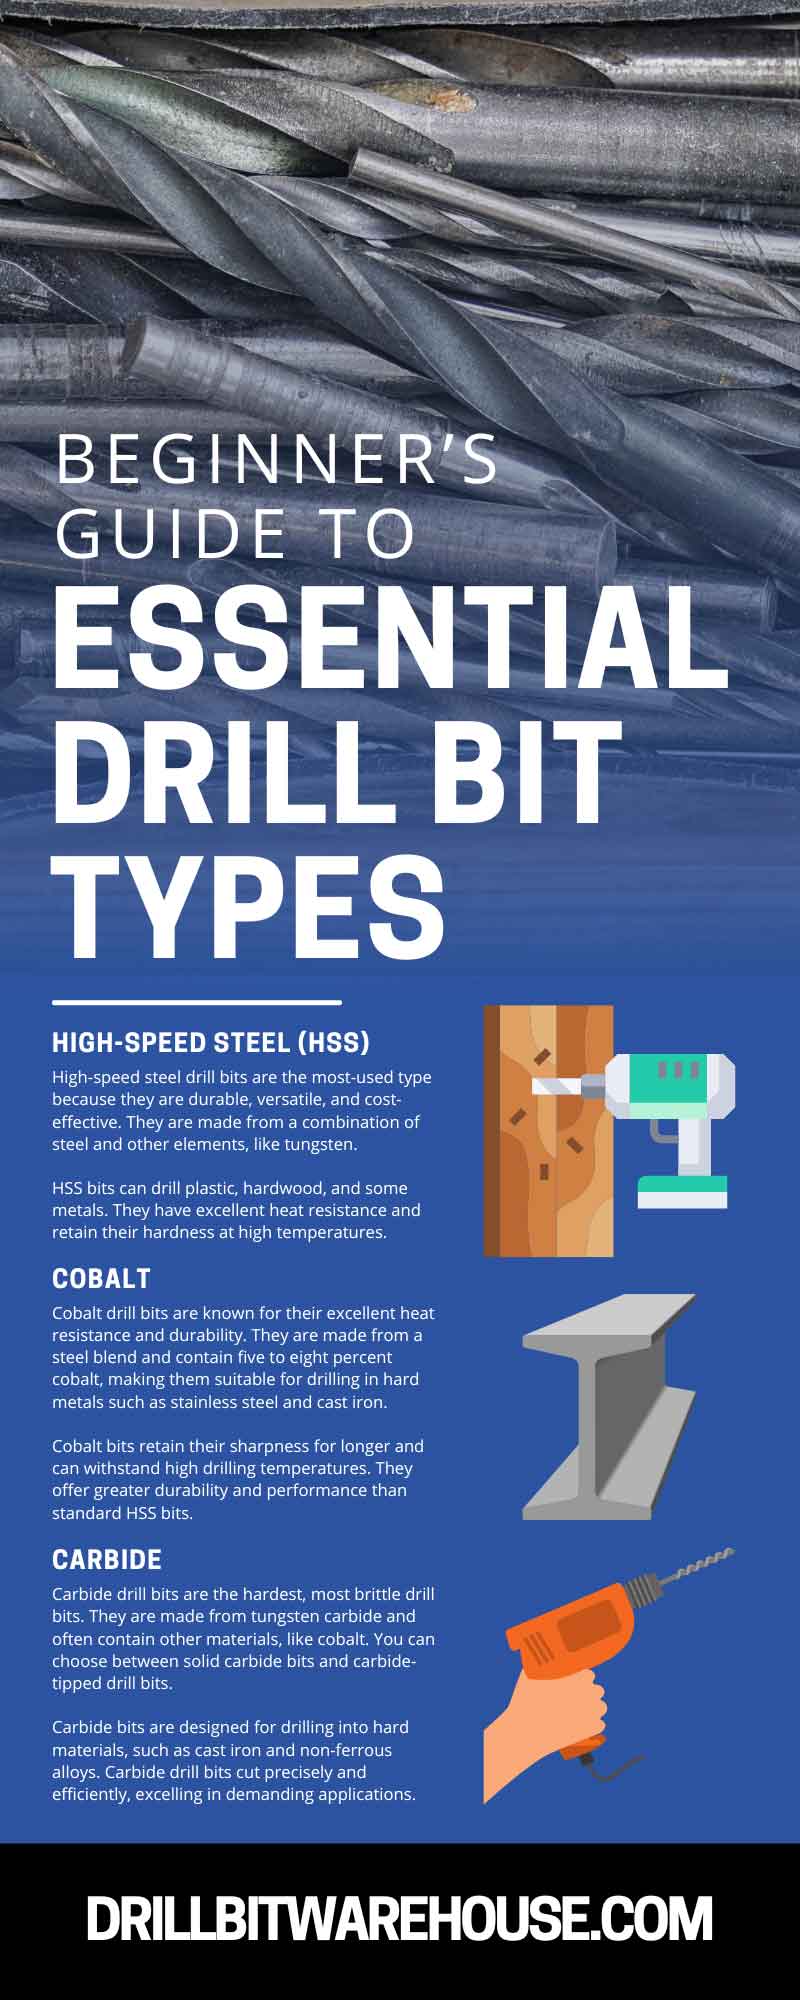 Beginner’s Guide to Essential Drill Bit Types